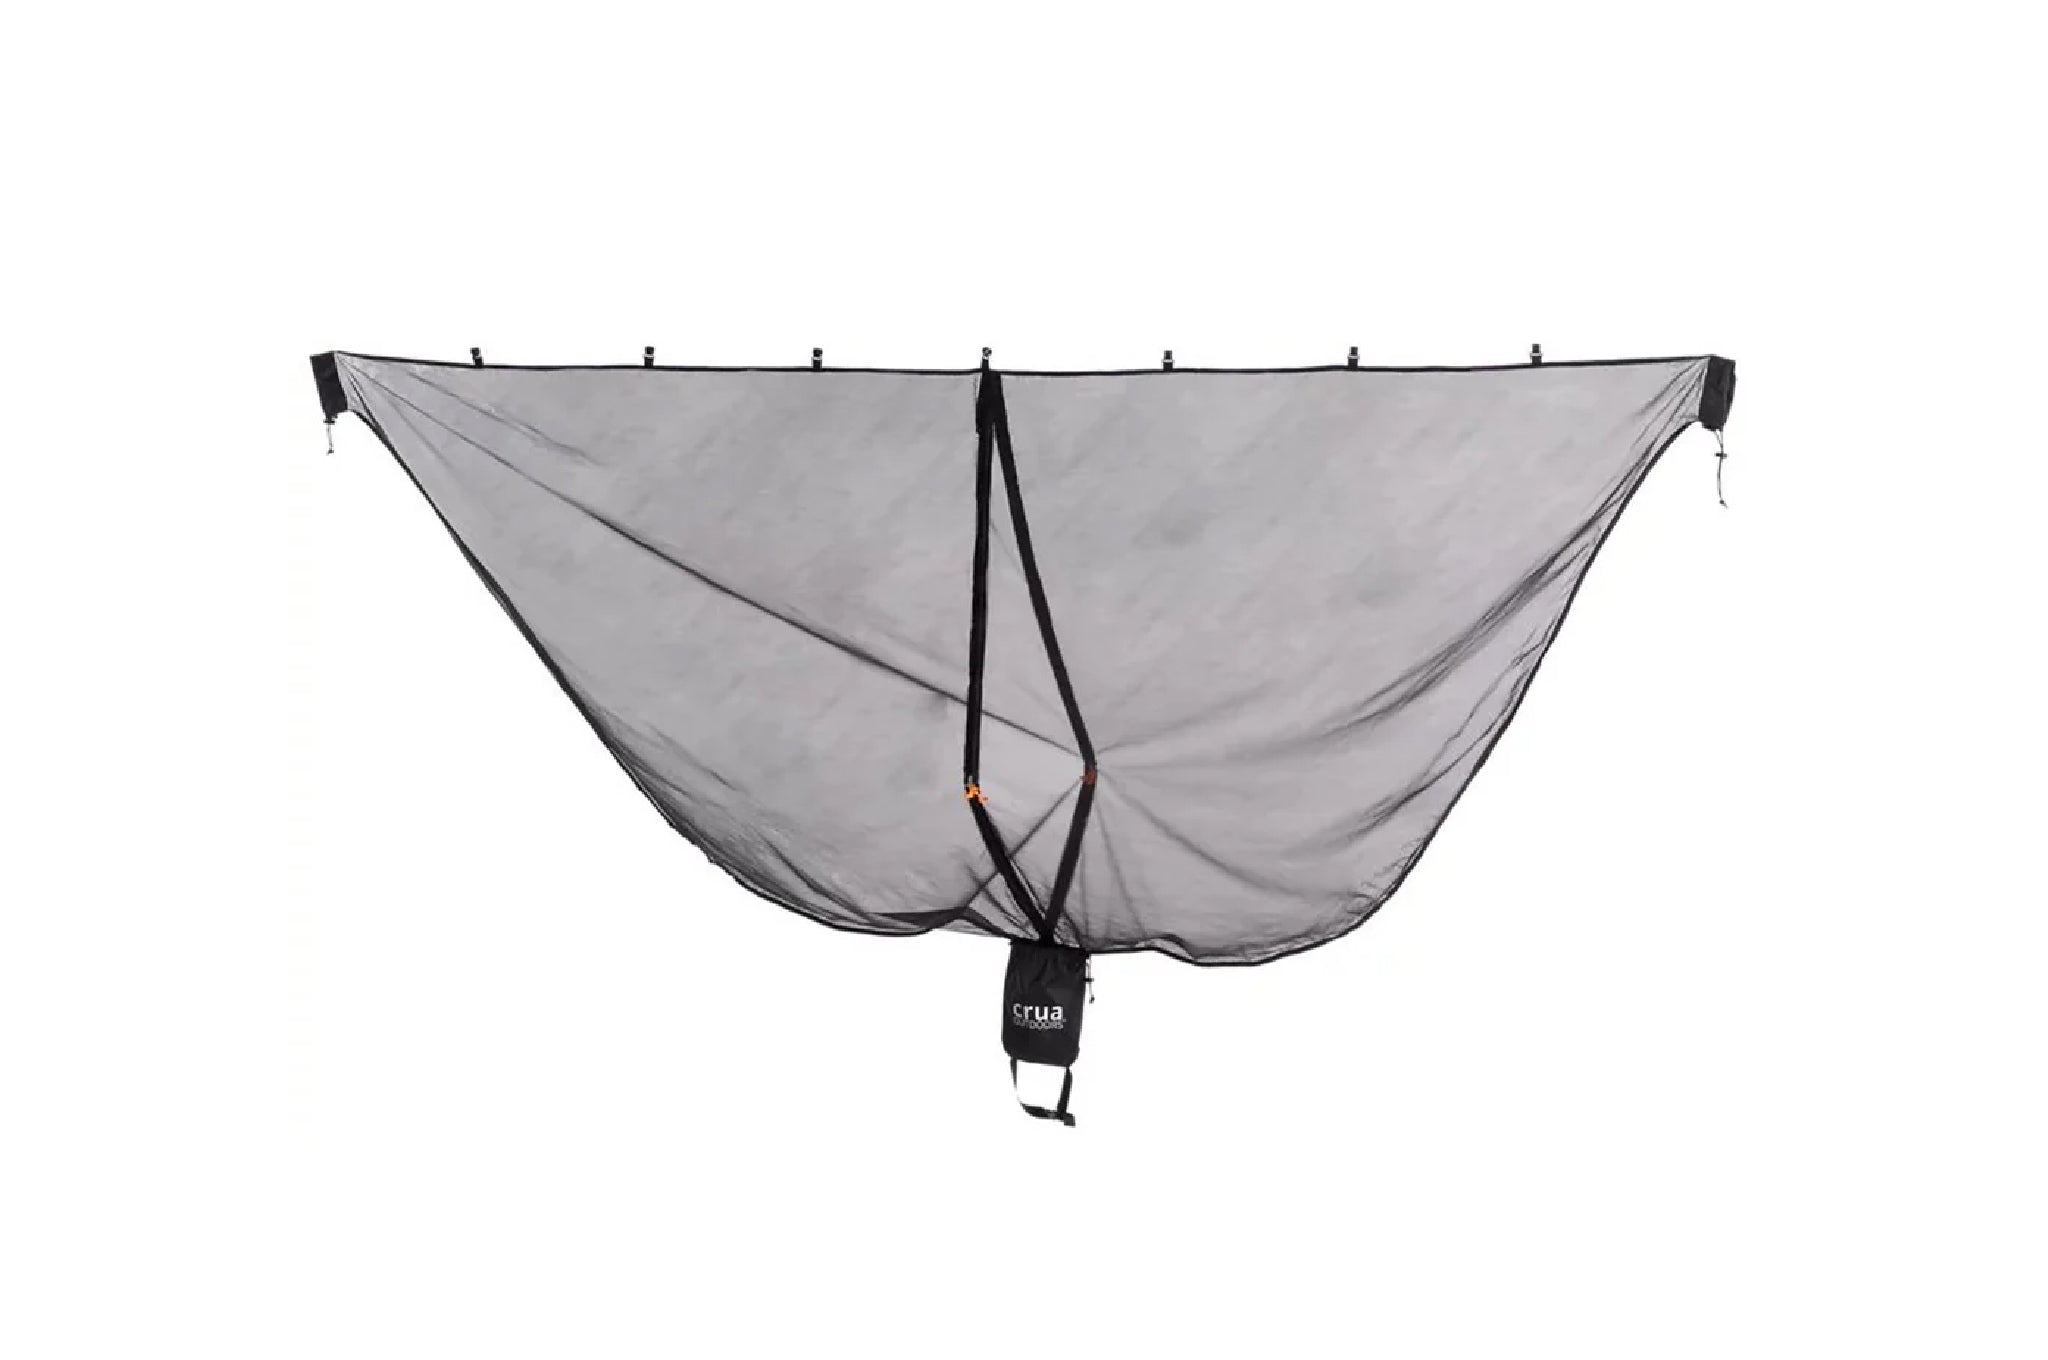 360 BUG MESH / NET | STAY PROTECTED FROM THE PESKY BUGS AND ENJOY A SAFE OUTDOOR EXPERIENCE